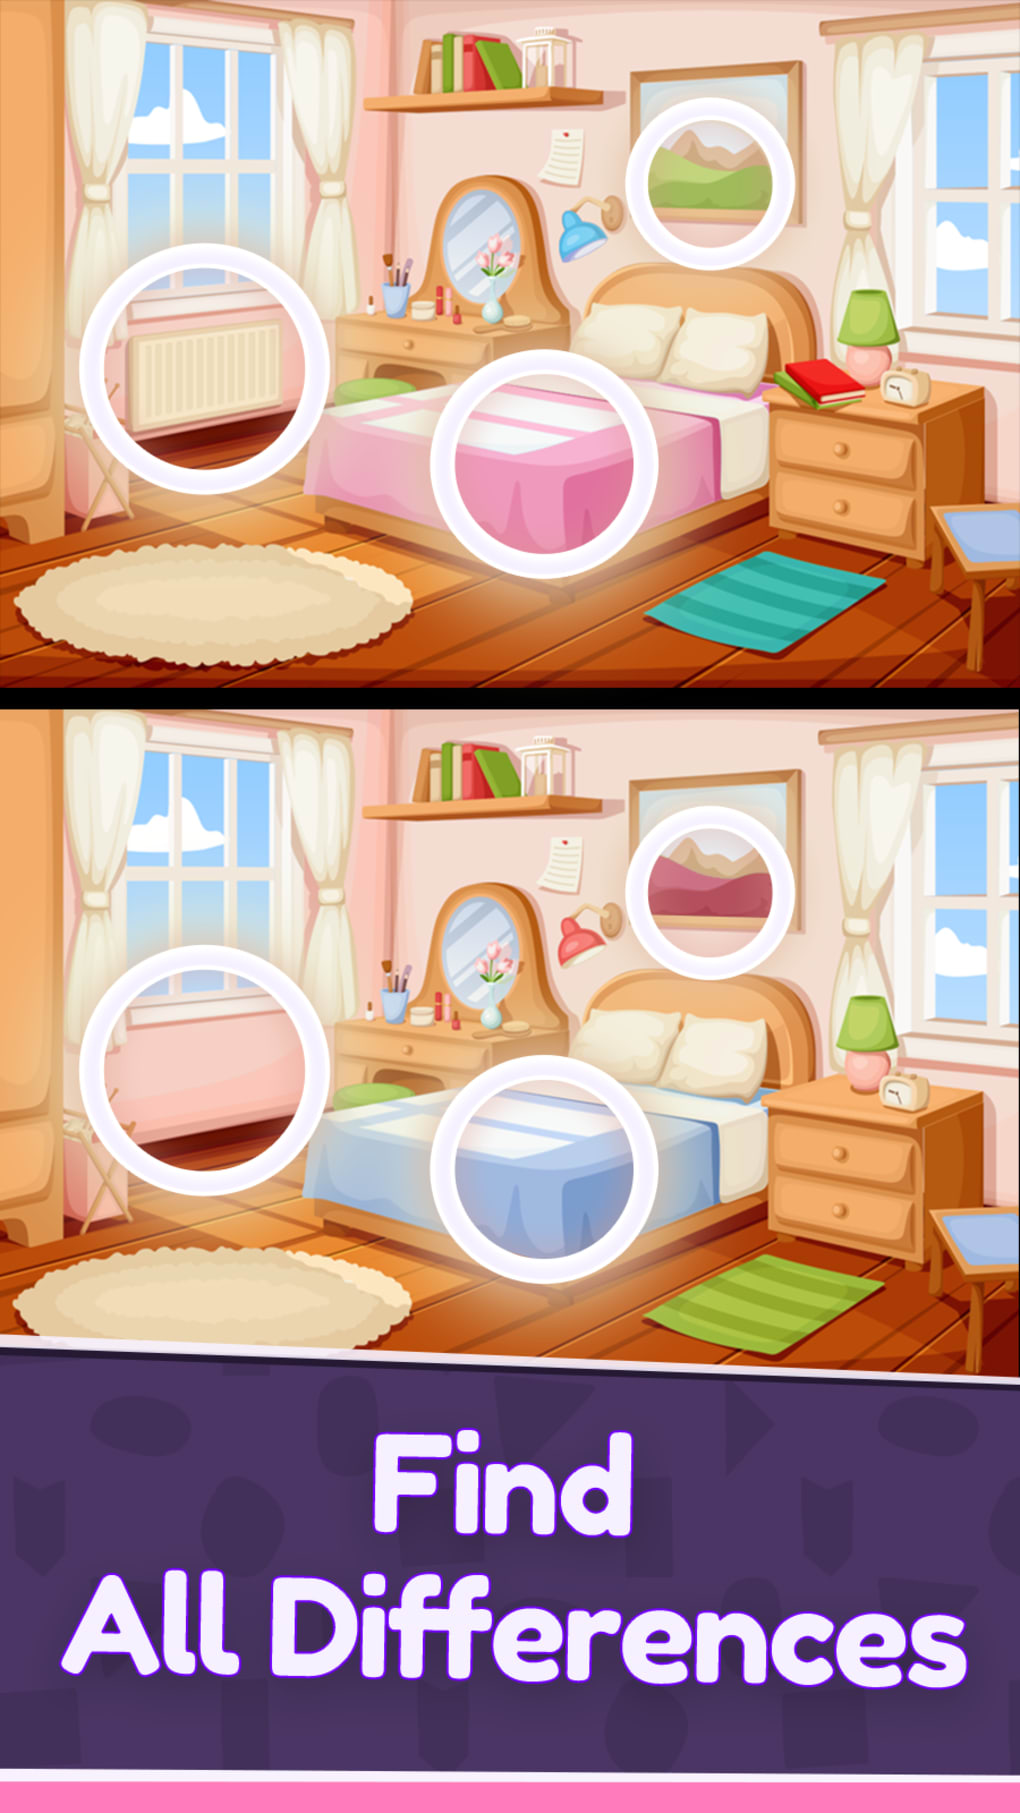 differences-find-spot-the-difference-games-apk-for-android-download